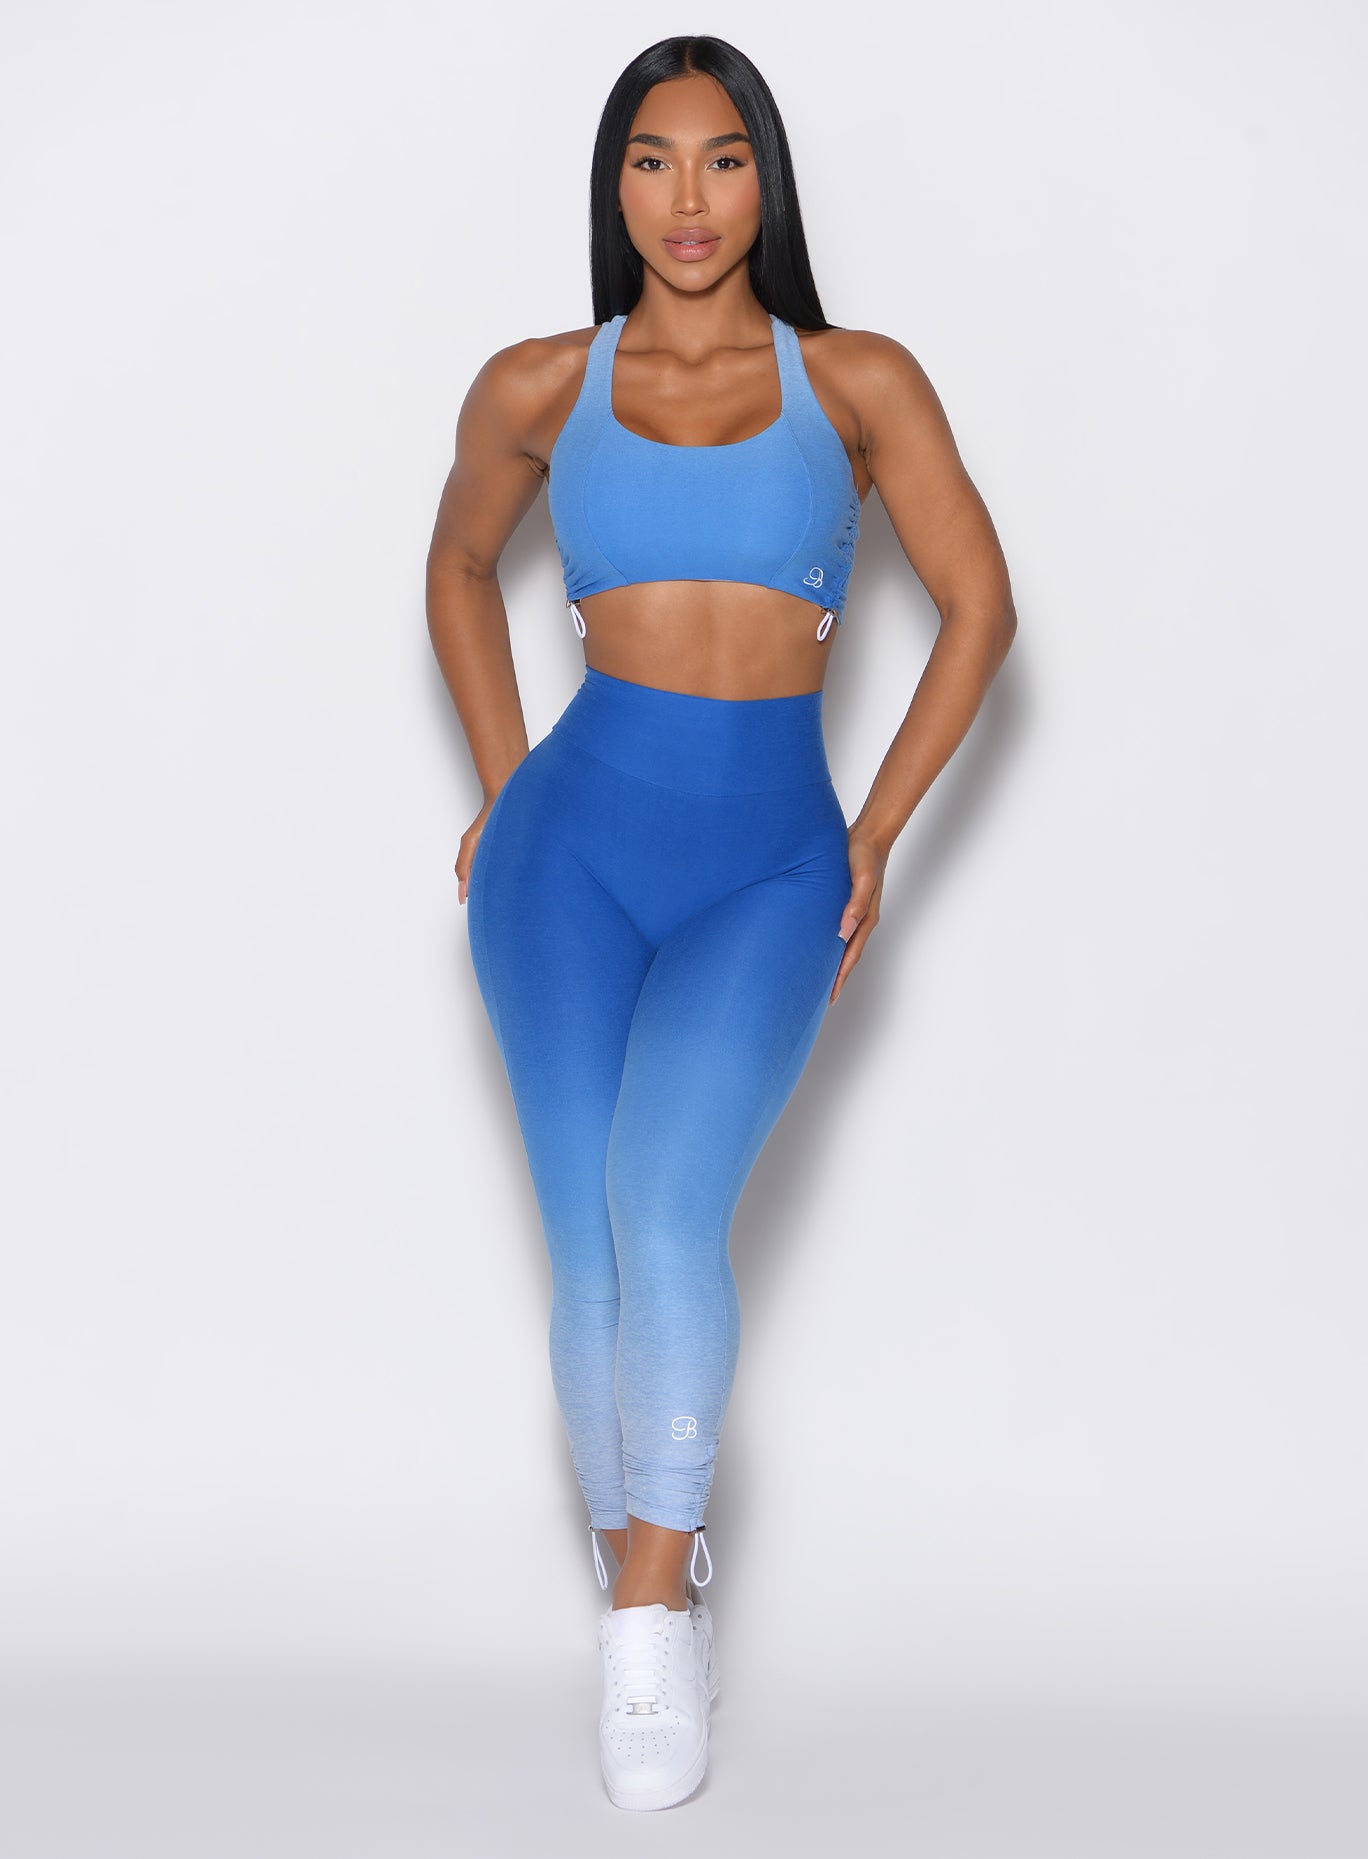 front profile view of a model facing forward wearing our toggle leggings in Ombre Blue Crush color along with the matching sports bra